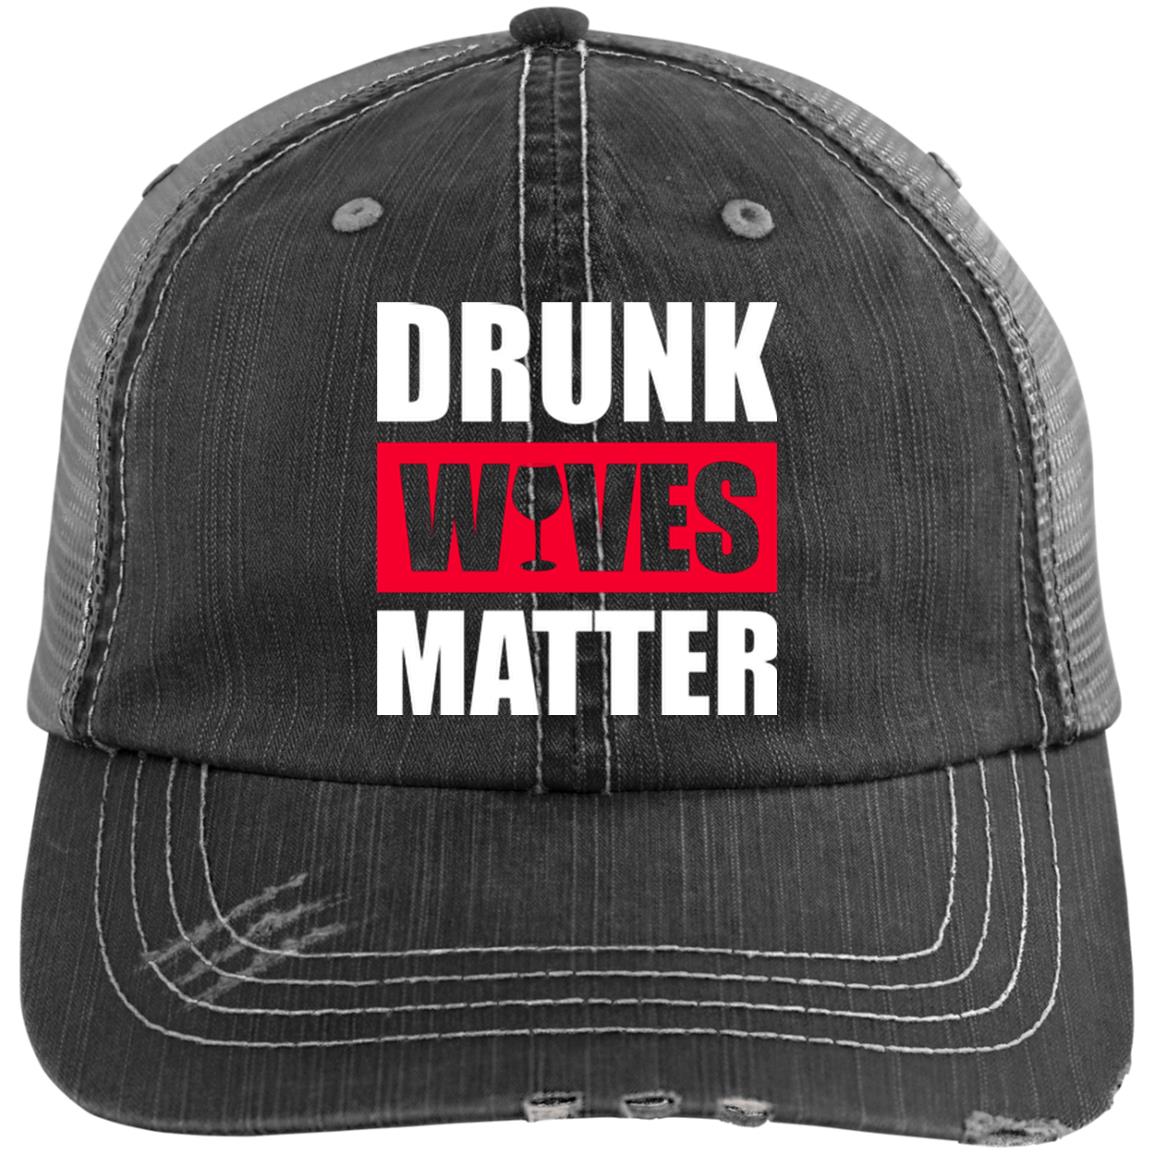 Drunk Wives Matter - Distressed Syle